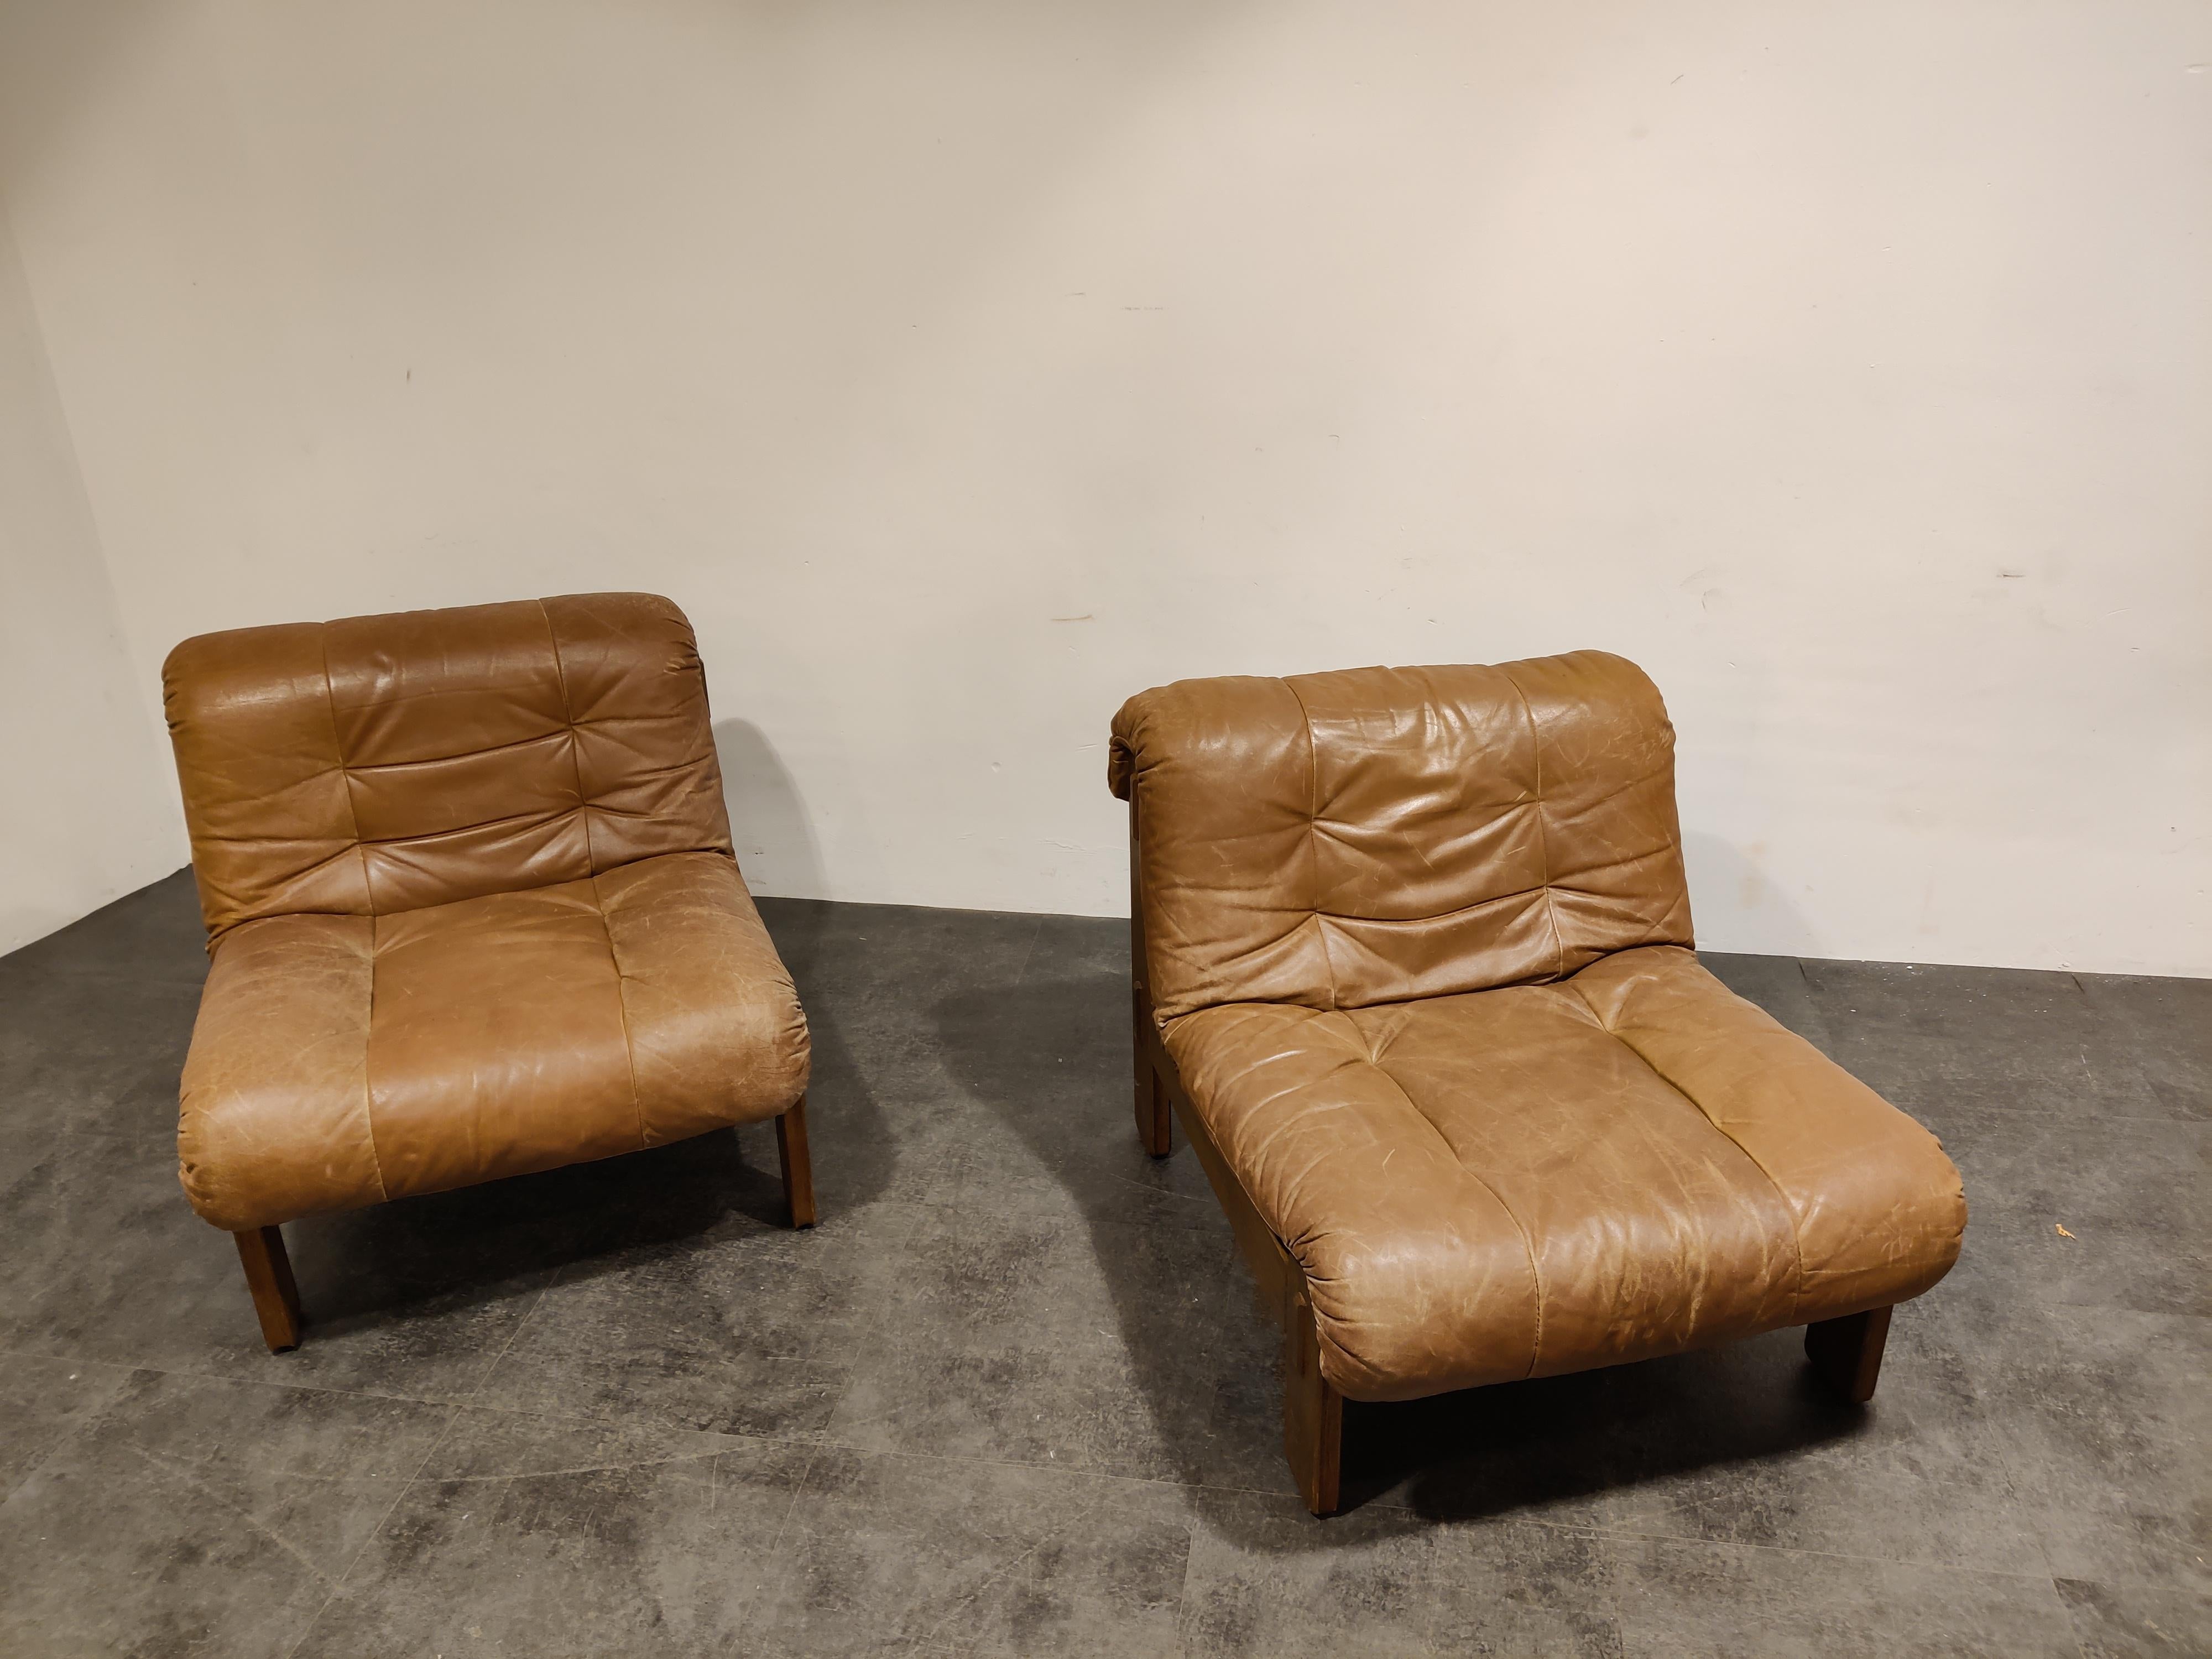 German Vintage Leather Lounge Chairs, 1970s